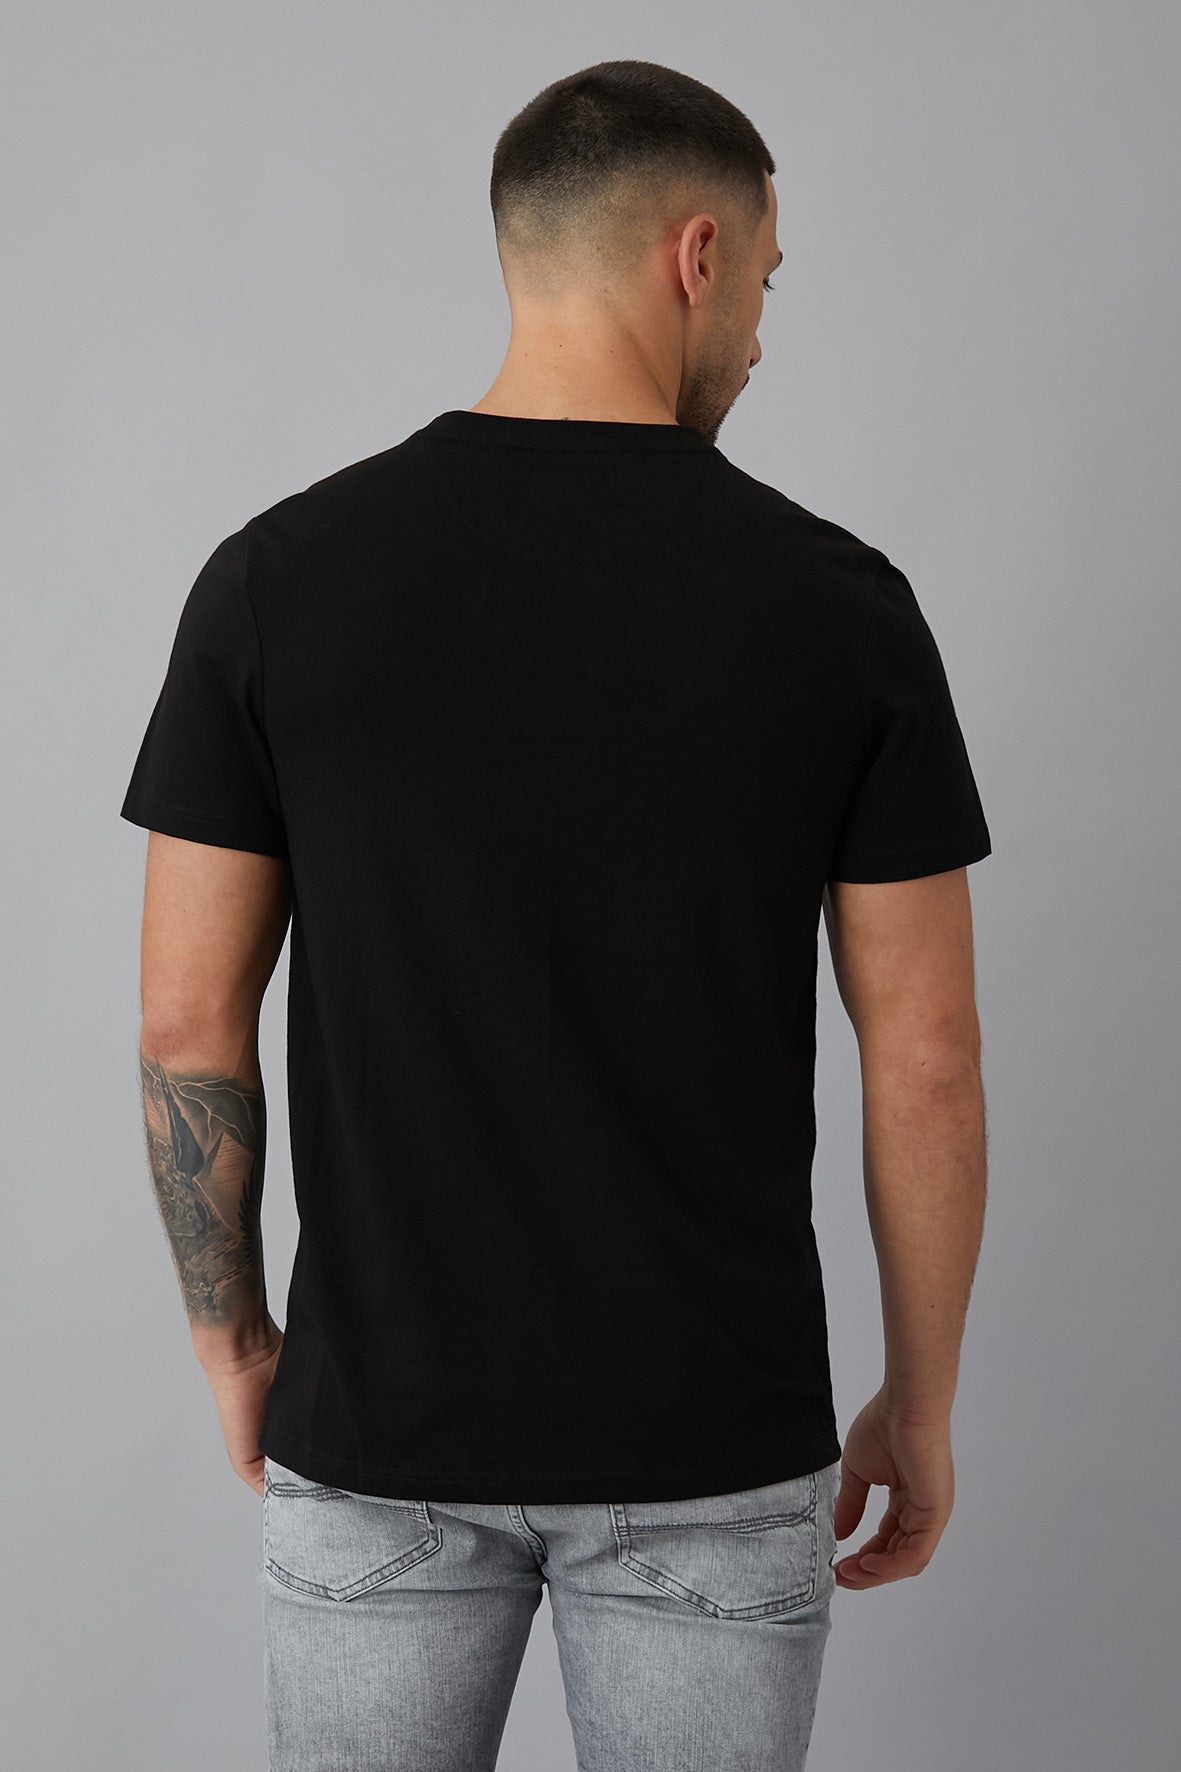 ARTICULATE Printed crew neck t-shirt in BLACK - DML Jeans 